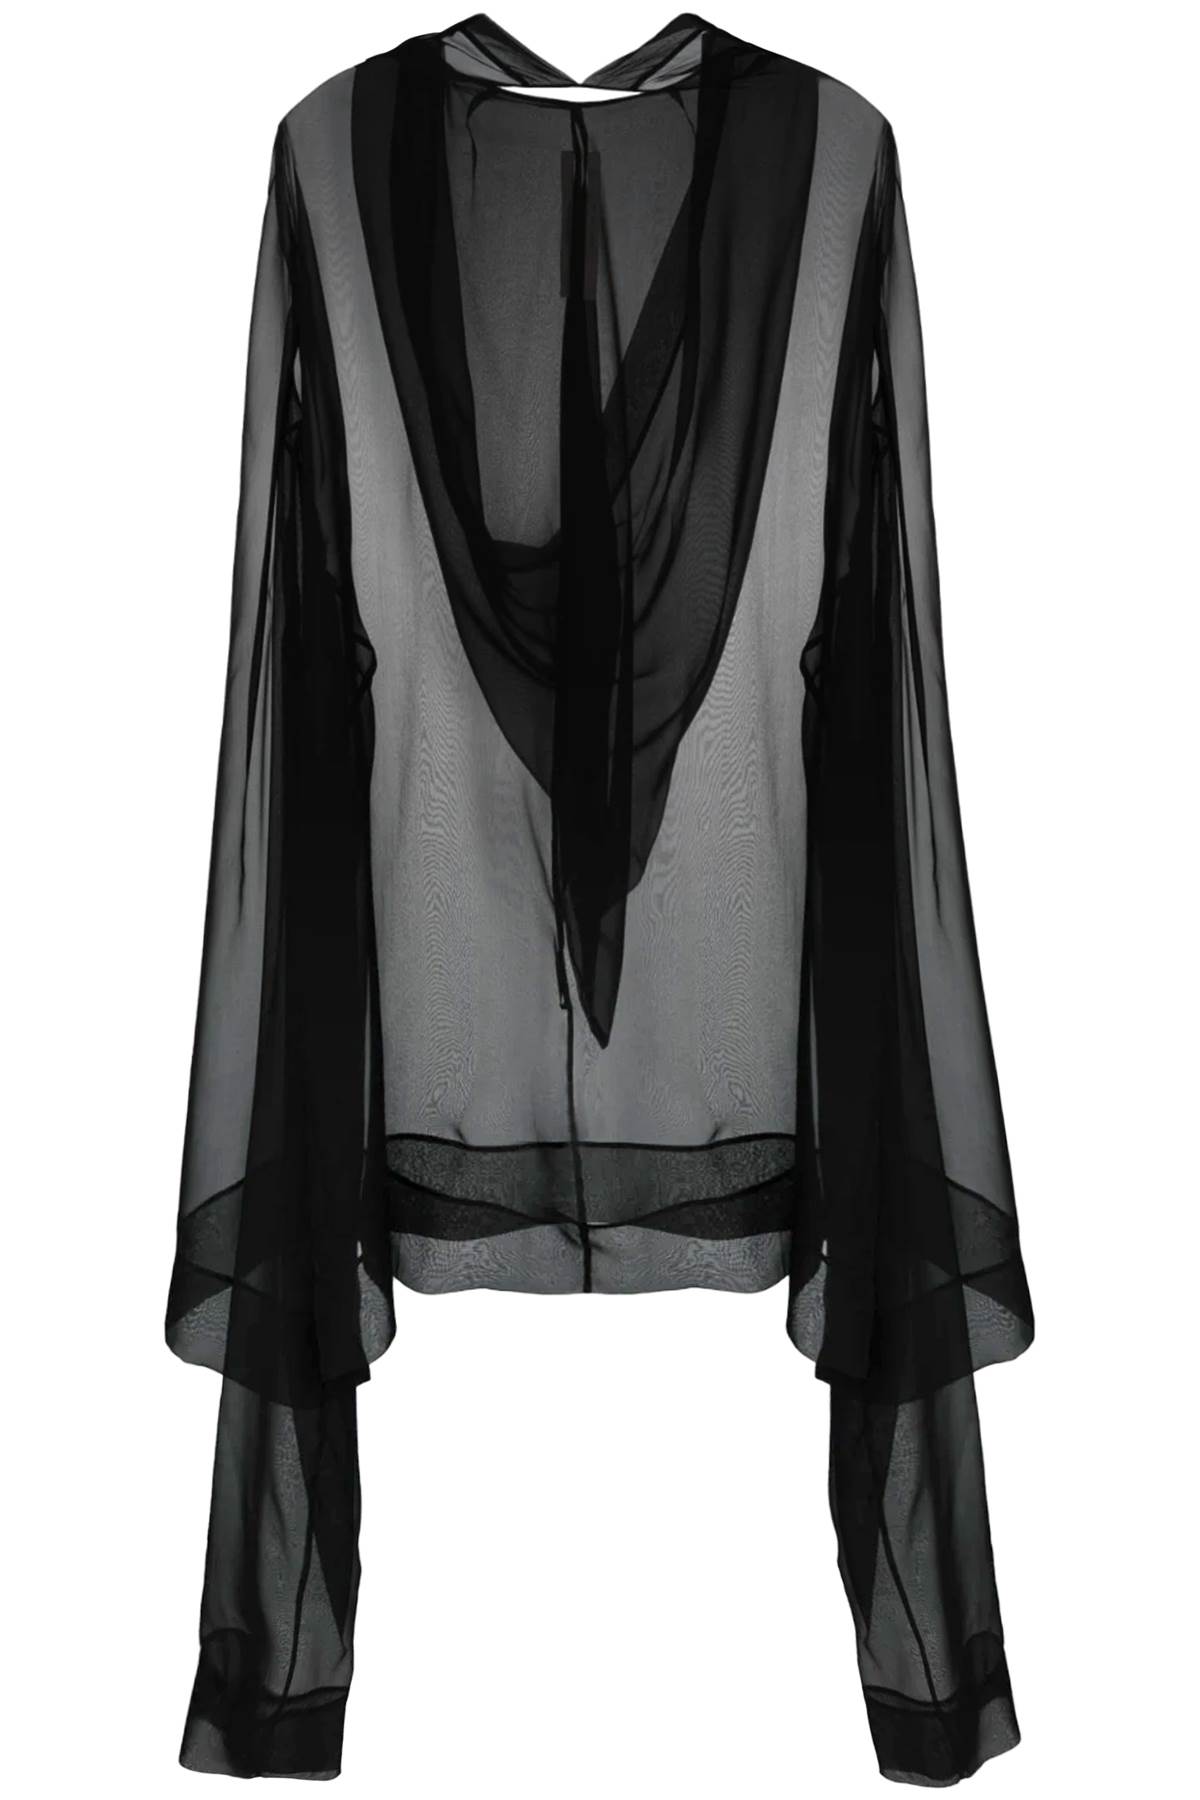 RICK OWENS SEE-THROUGH TUNIC DRESS WITH HOOD